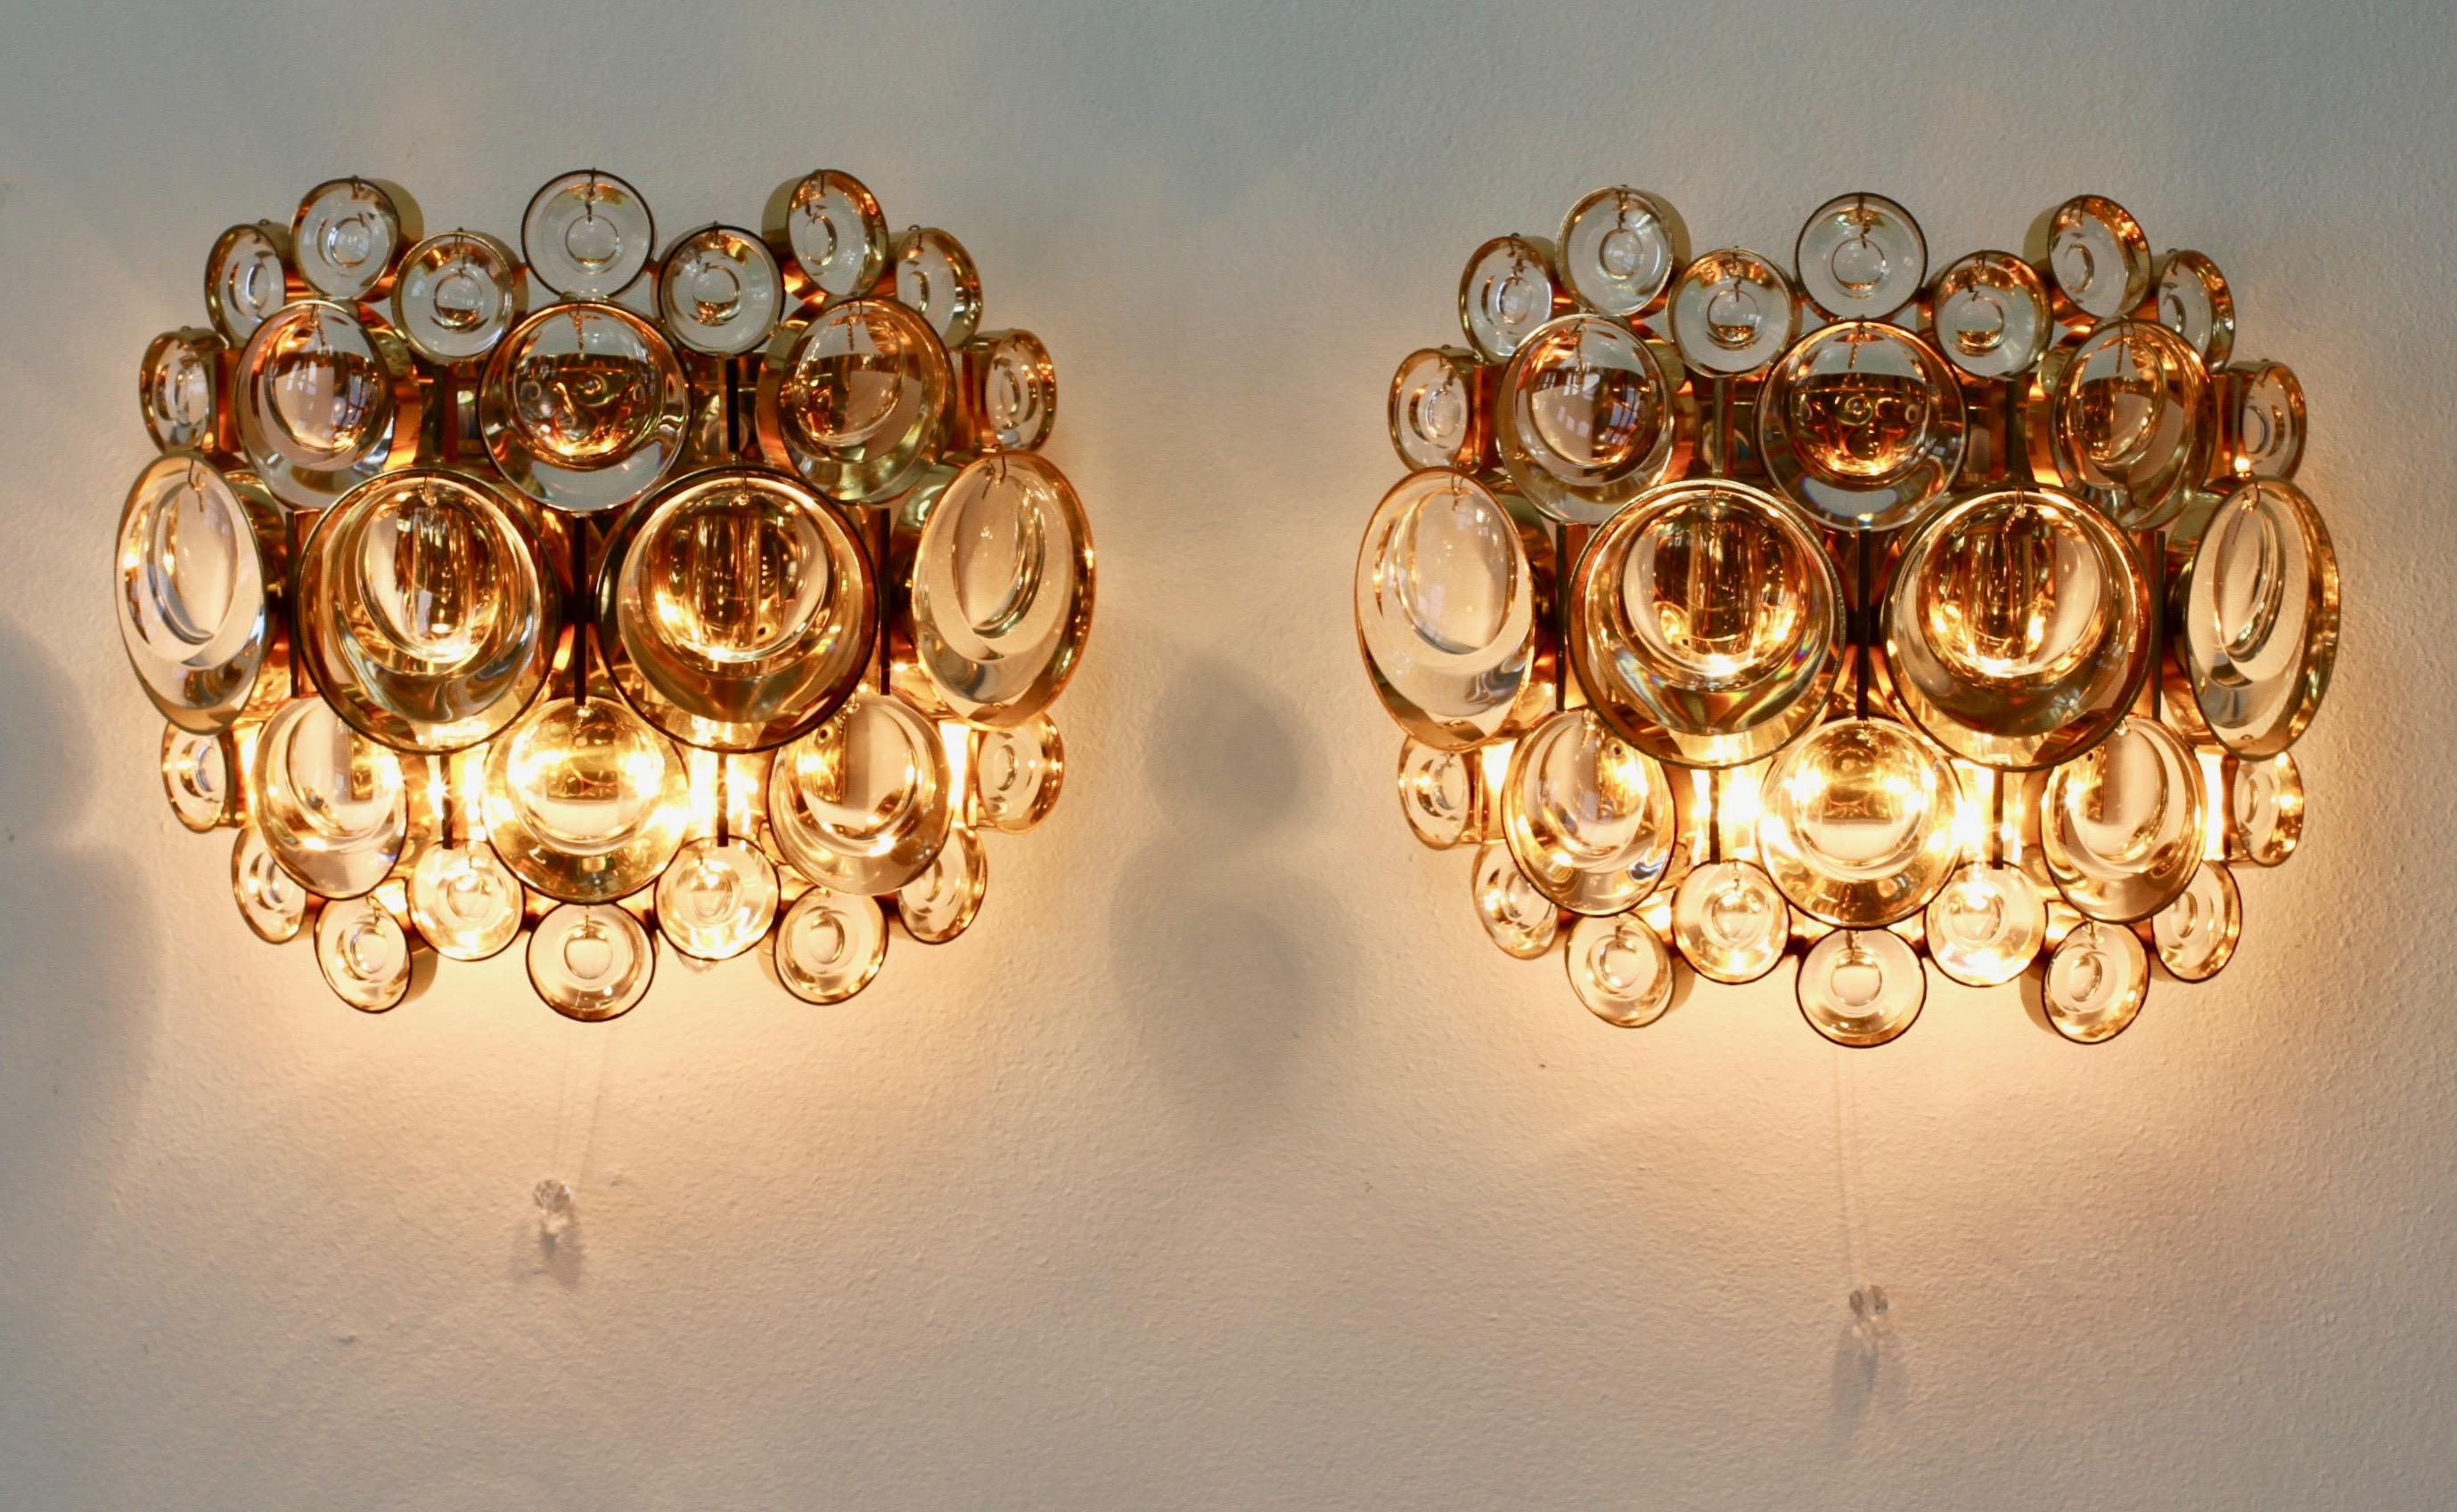 Stunning Pair of German Mid-Century Crystal Glass Wall Lights / Sconces by Palwa 1